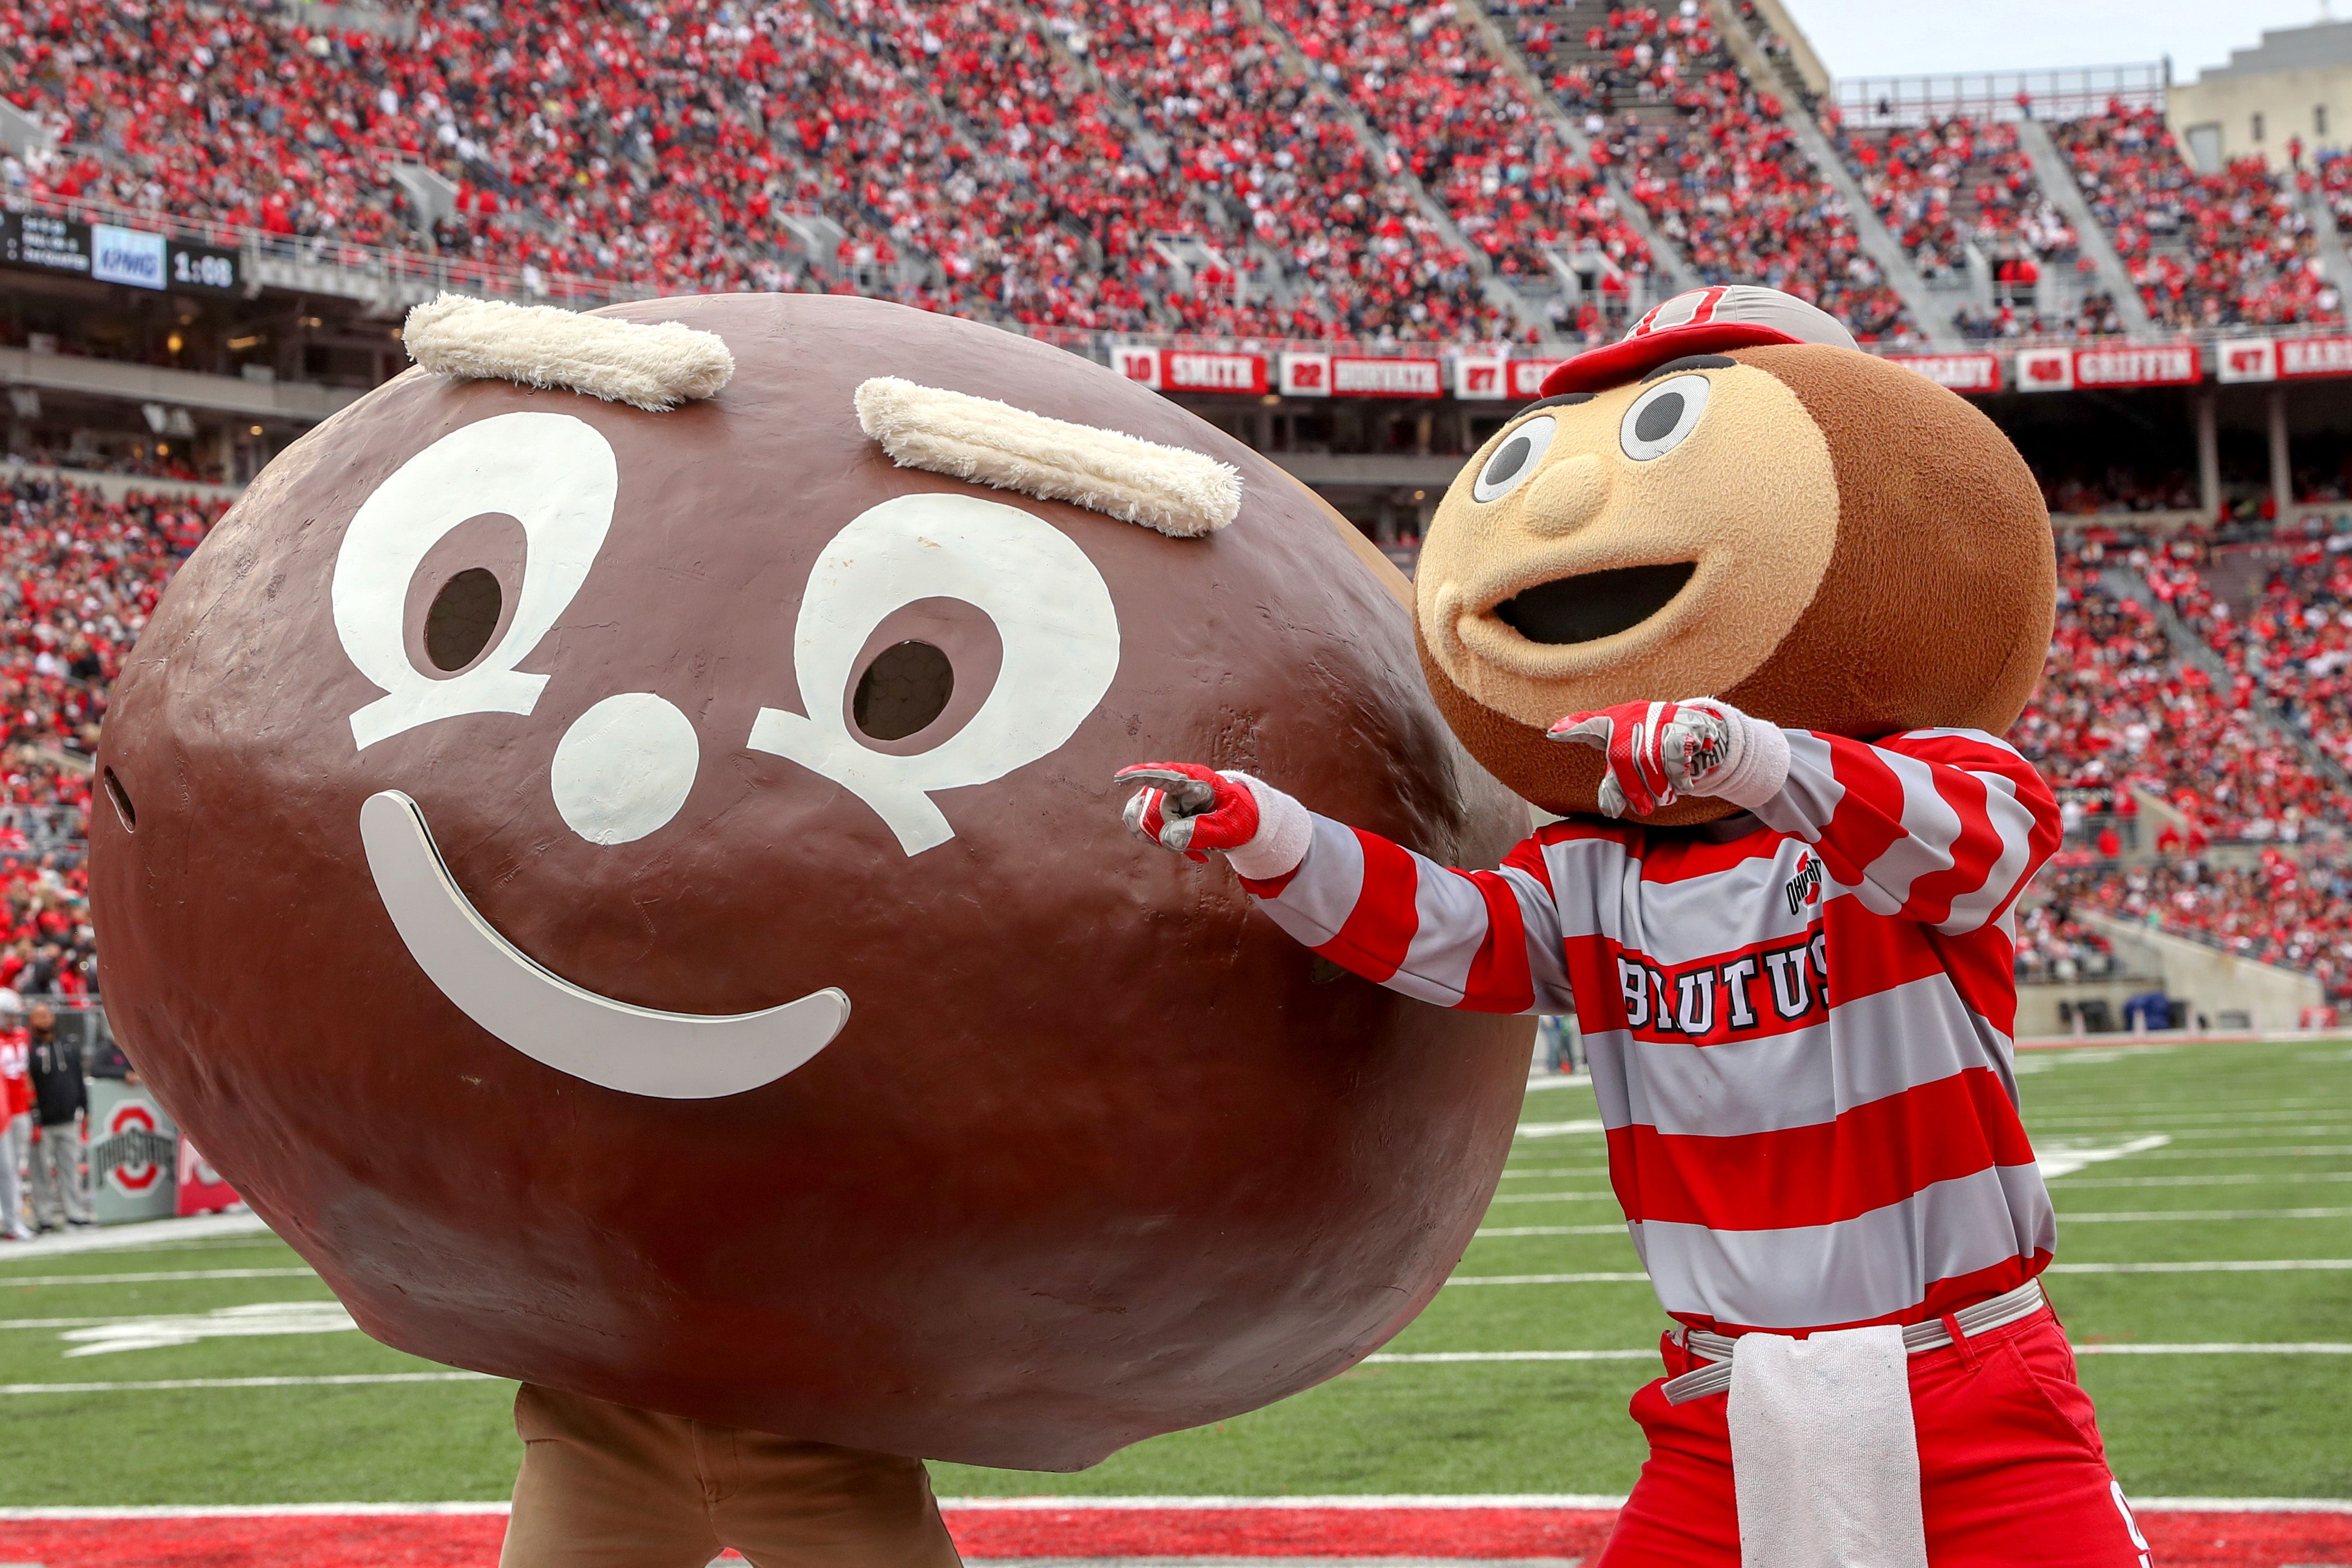 Two versions of Brutus buckeye — from the '60s and today — stand on the field at Ohio Stadium